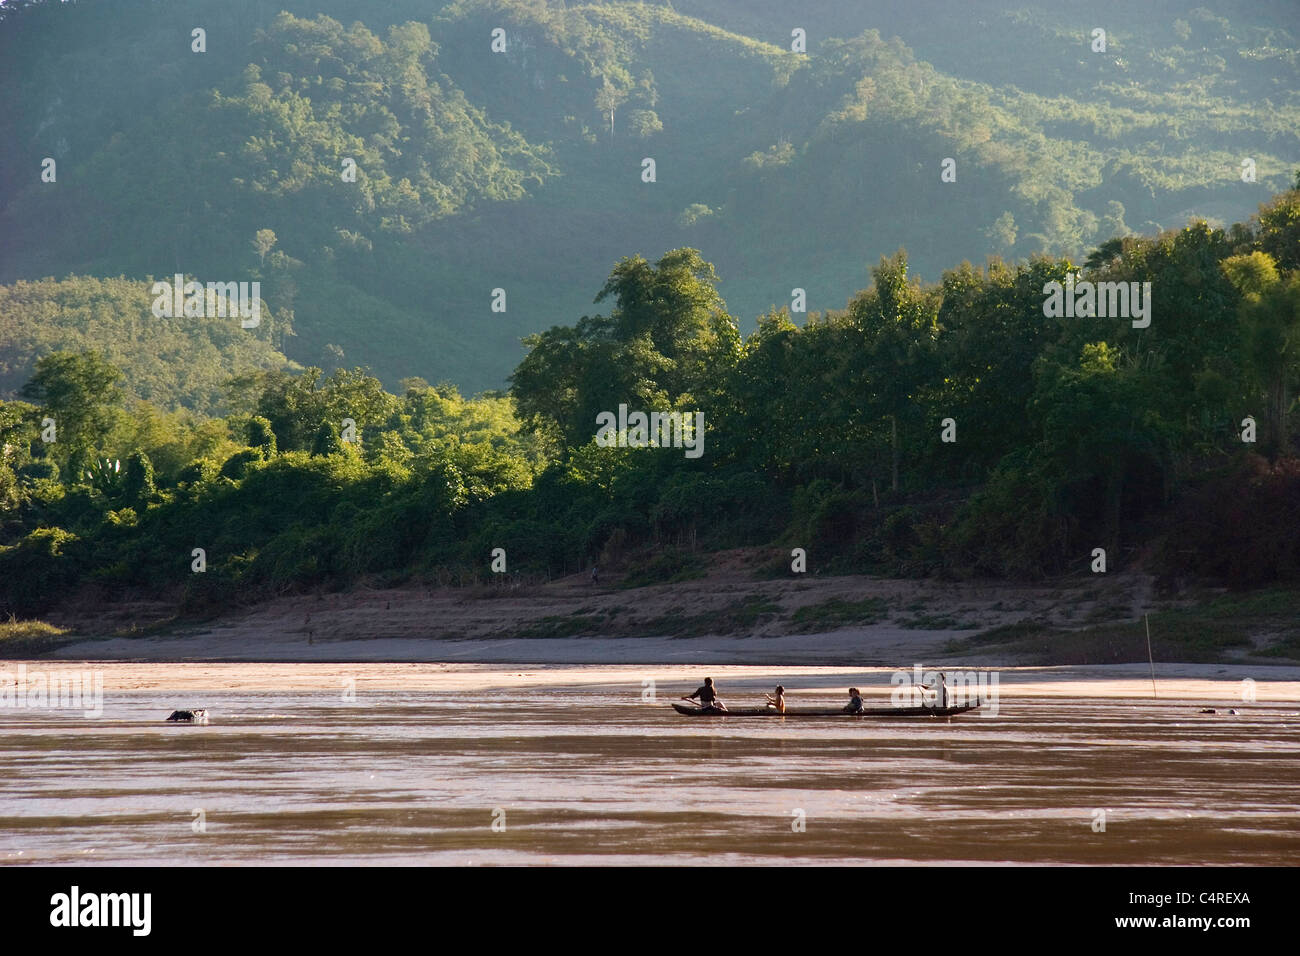 Boating on the Mekong River in a longboat, Laos Stock Photo